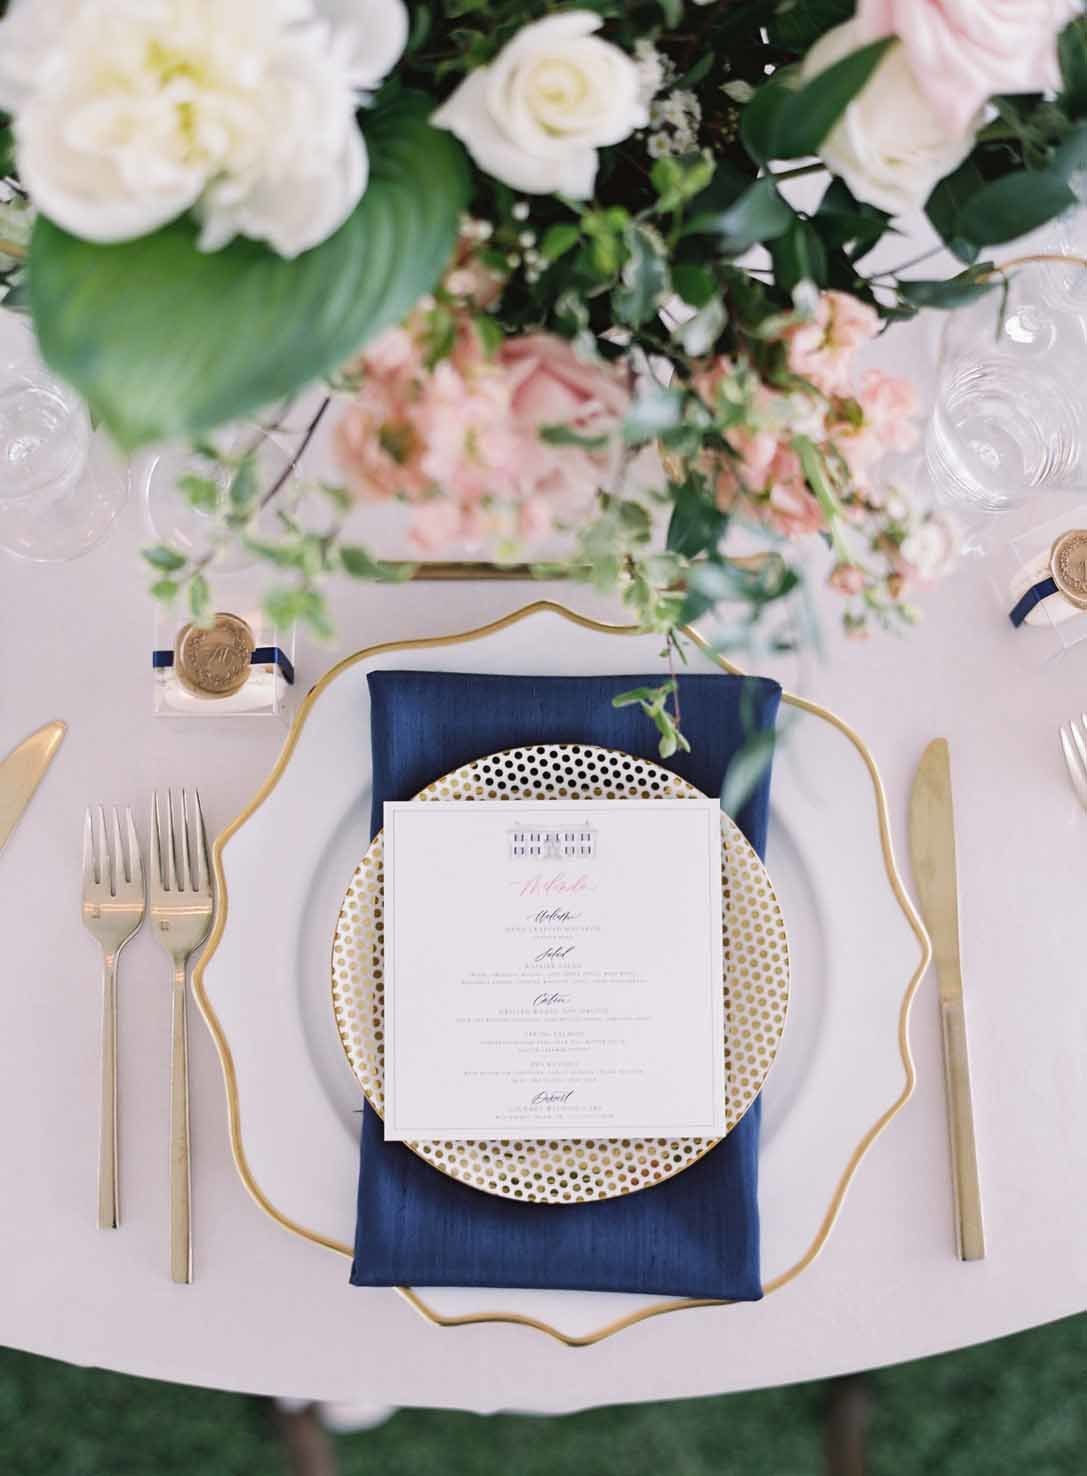 gold rimmed plates with navy napkin and menu card with garden flower centerpiece